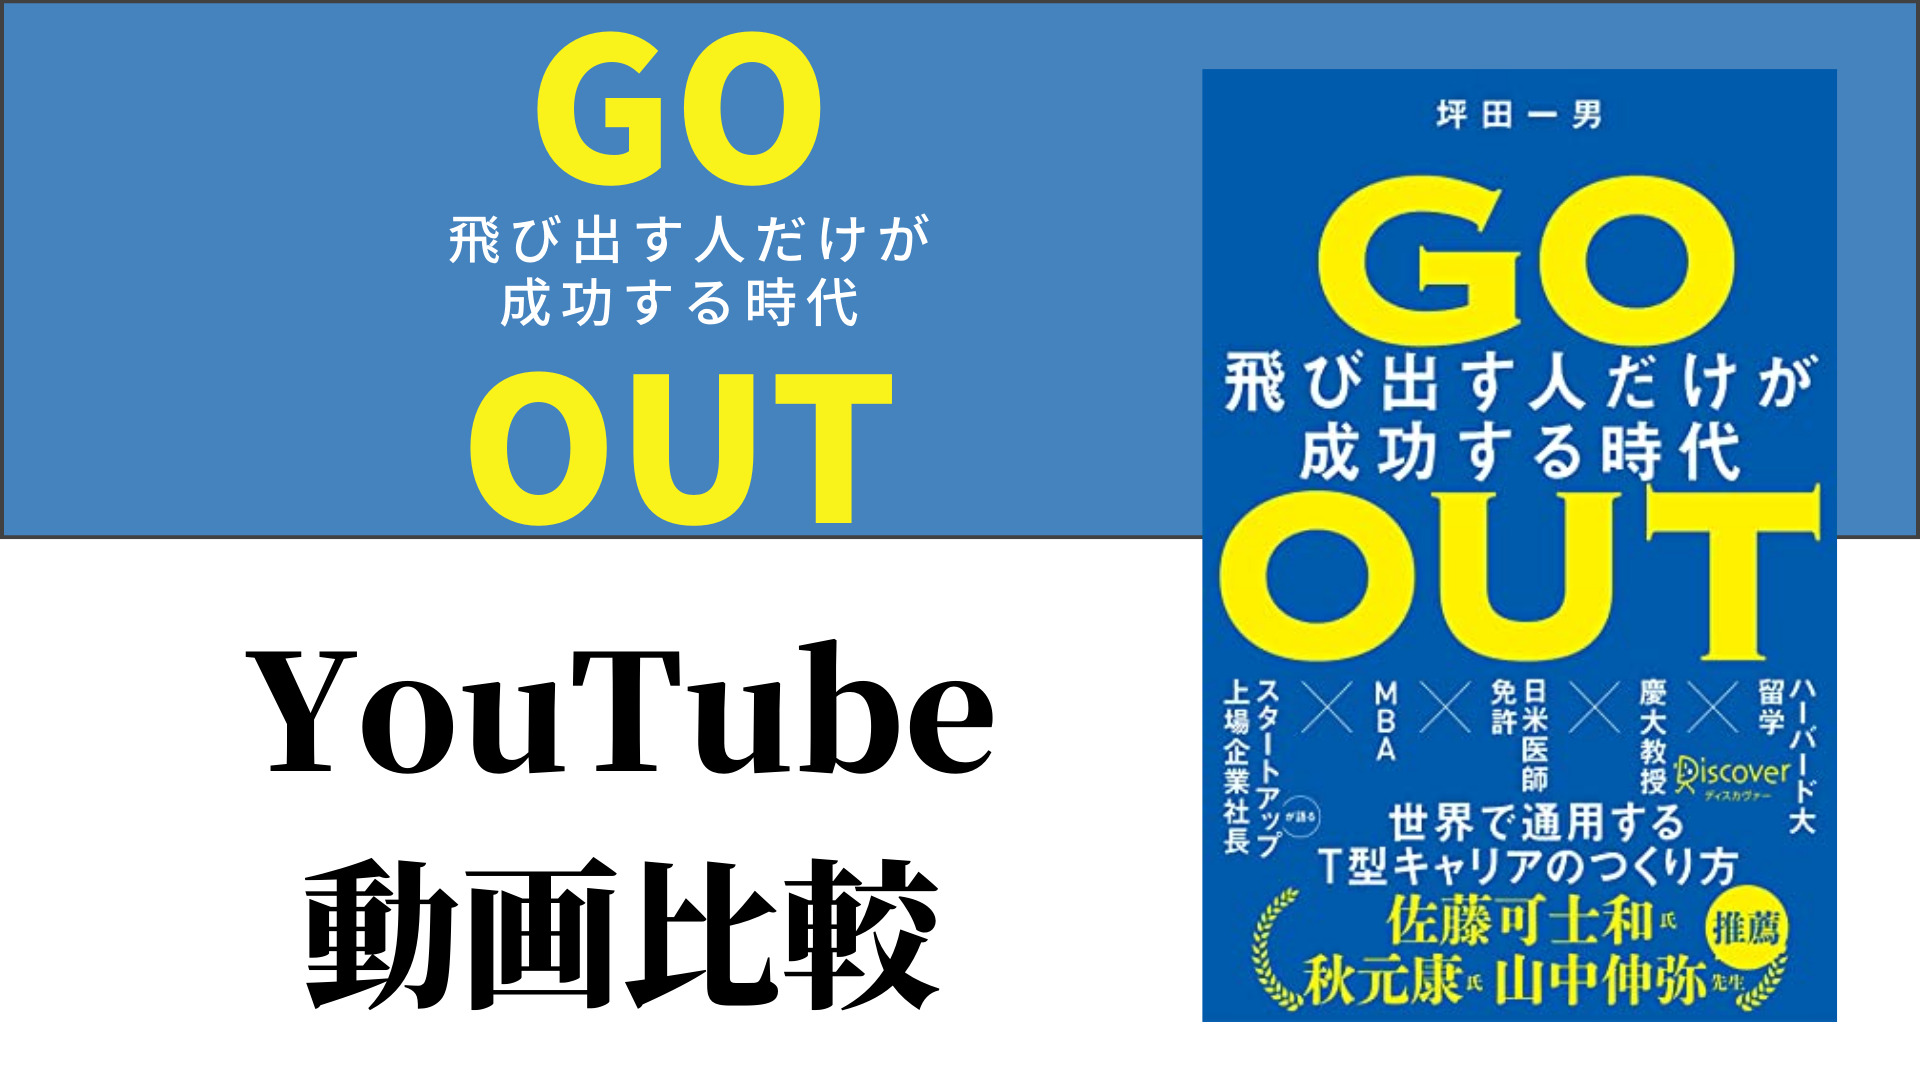 GO OUT 飛び出す人だけが成功する時代 YouTube動画比較（スマホ対応）